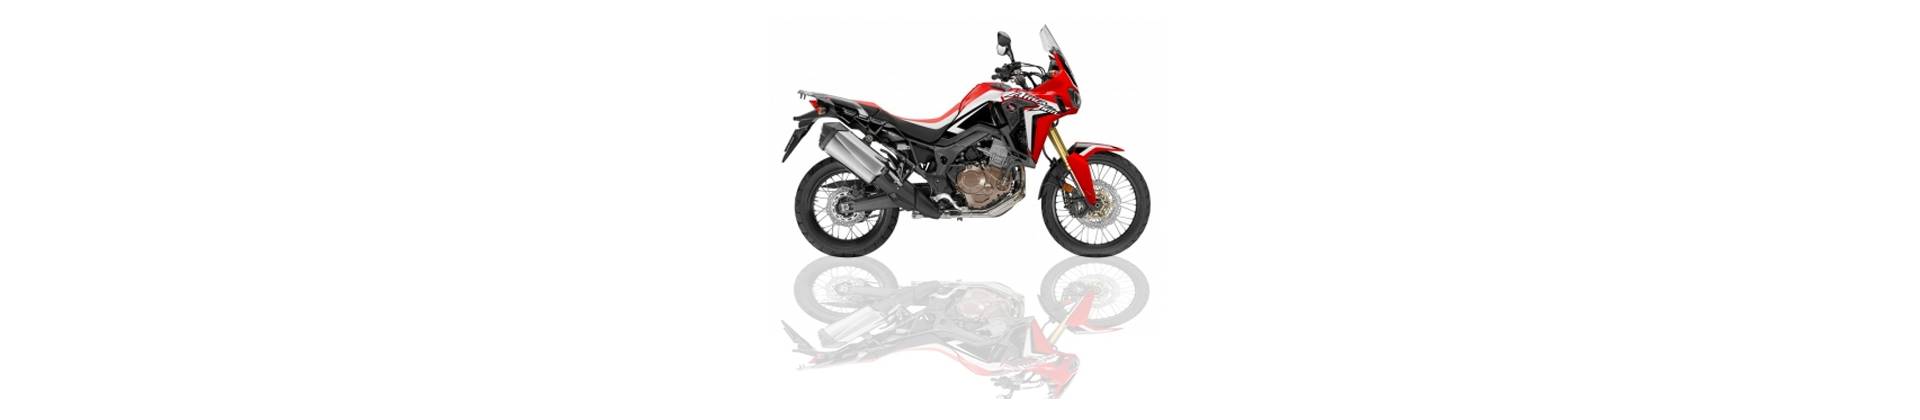 CRF1000L AFRICA TWIN 16-17